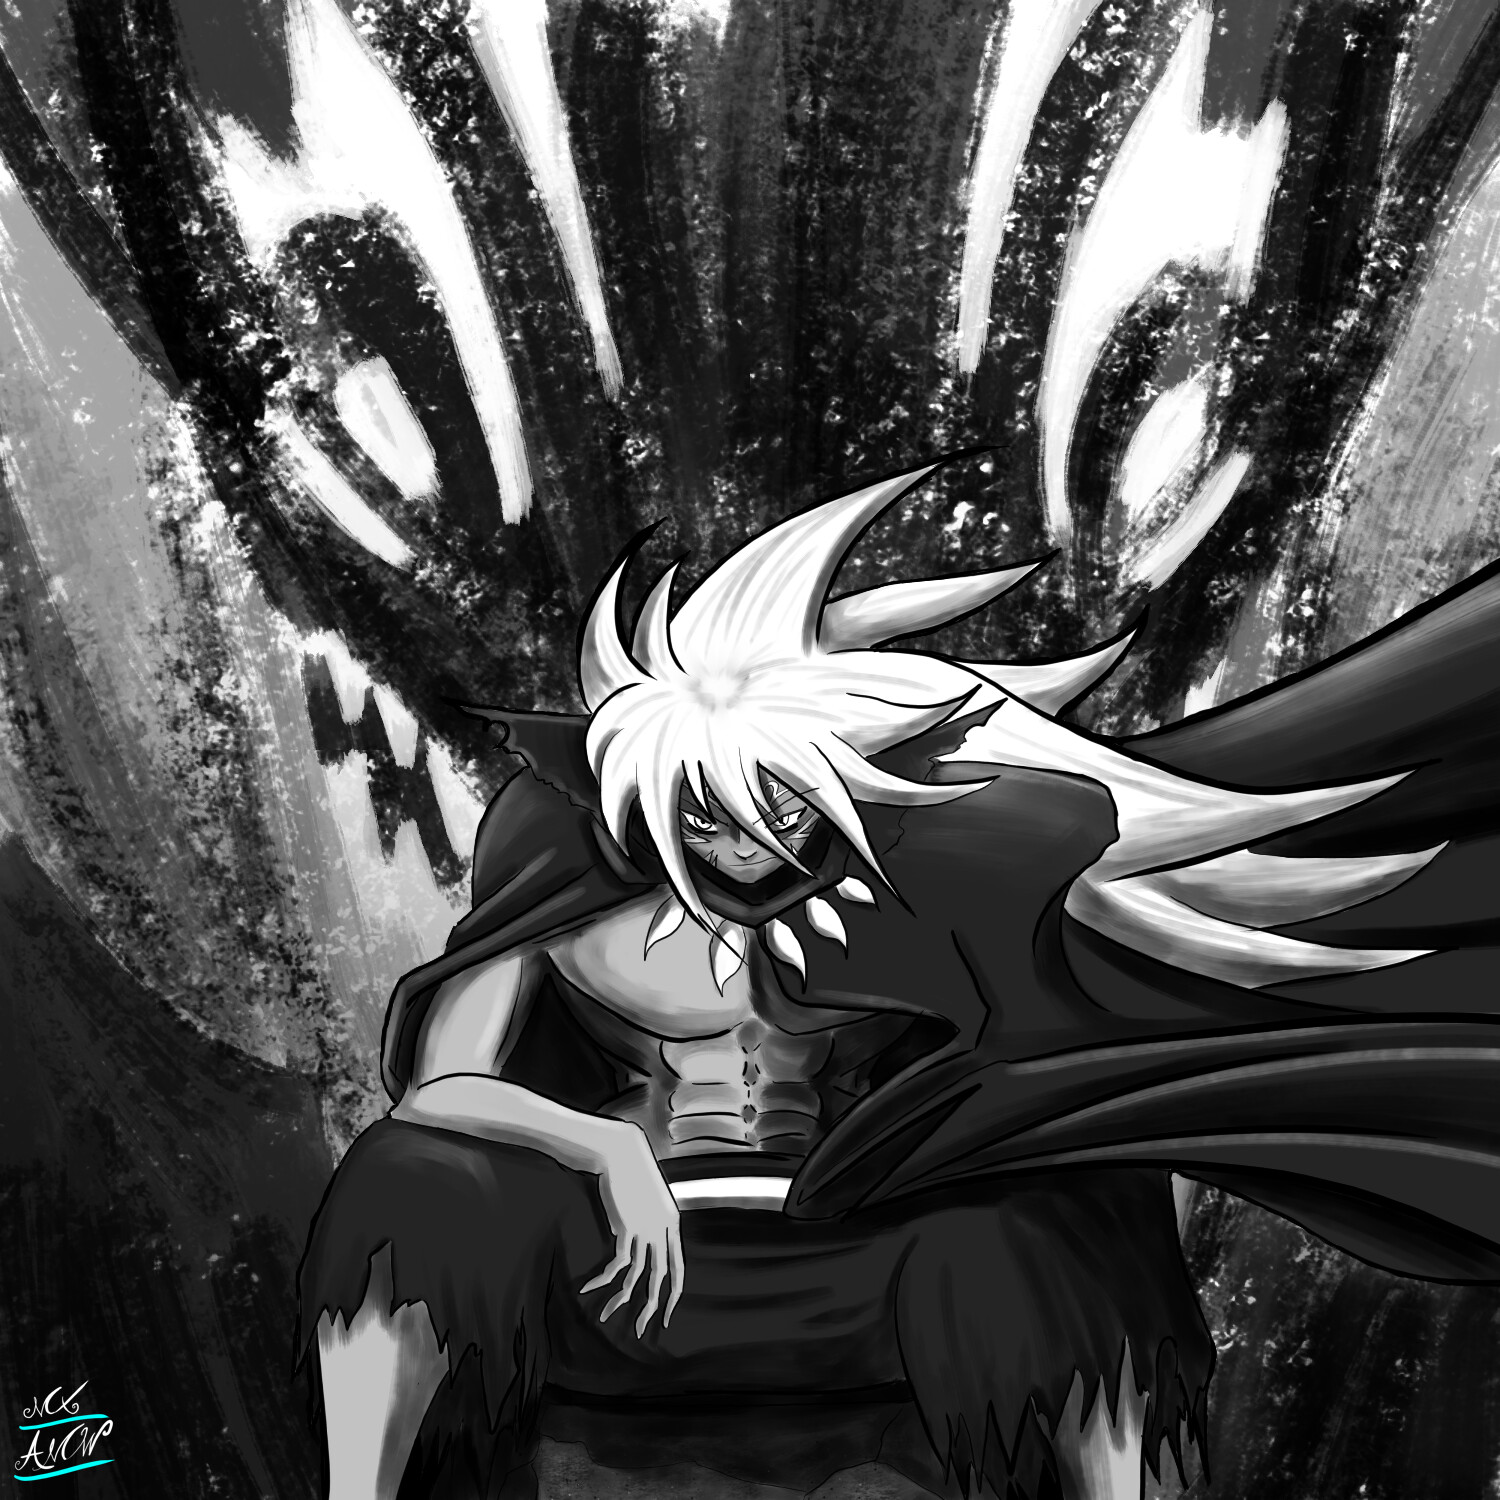 Natsus Fired Up Blade Dragon King Mode  Daily Anime Art